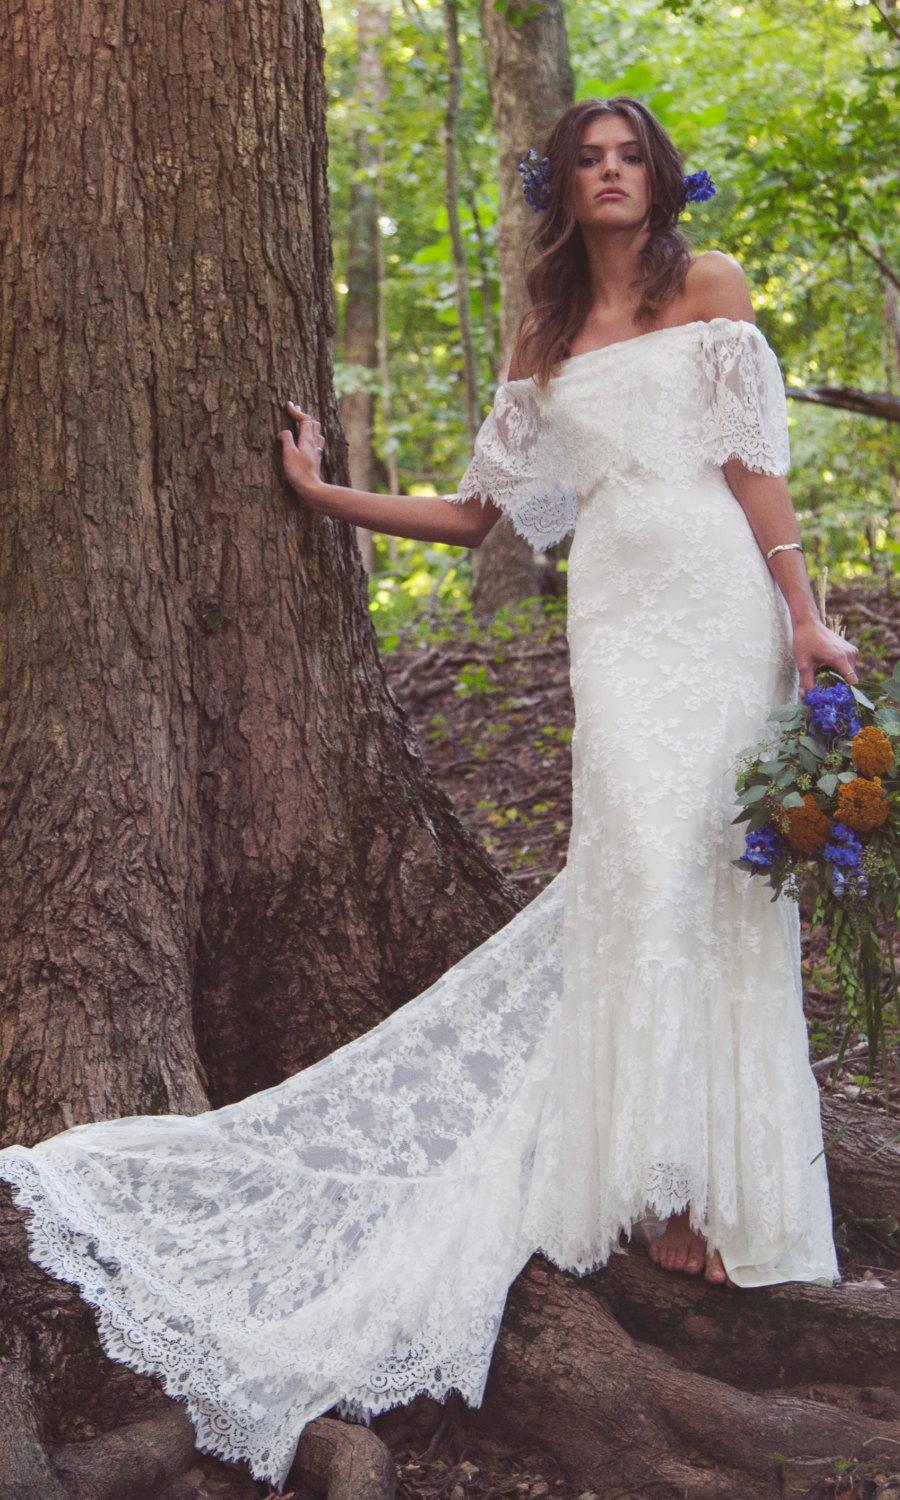 Wedding - Off The Shoulder Wedding Dress, Lace Bridal Gown, Scalloped Lace Wedding Dress, Vintage Inspired Gown - "Laurence"